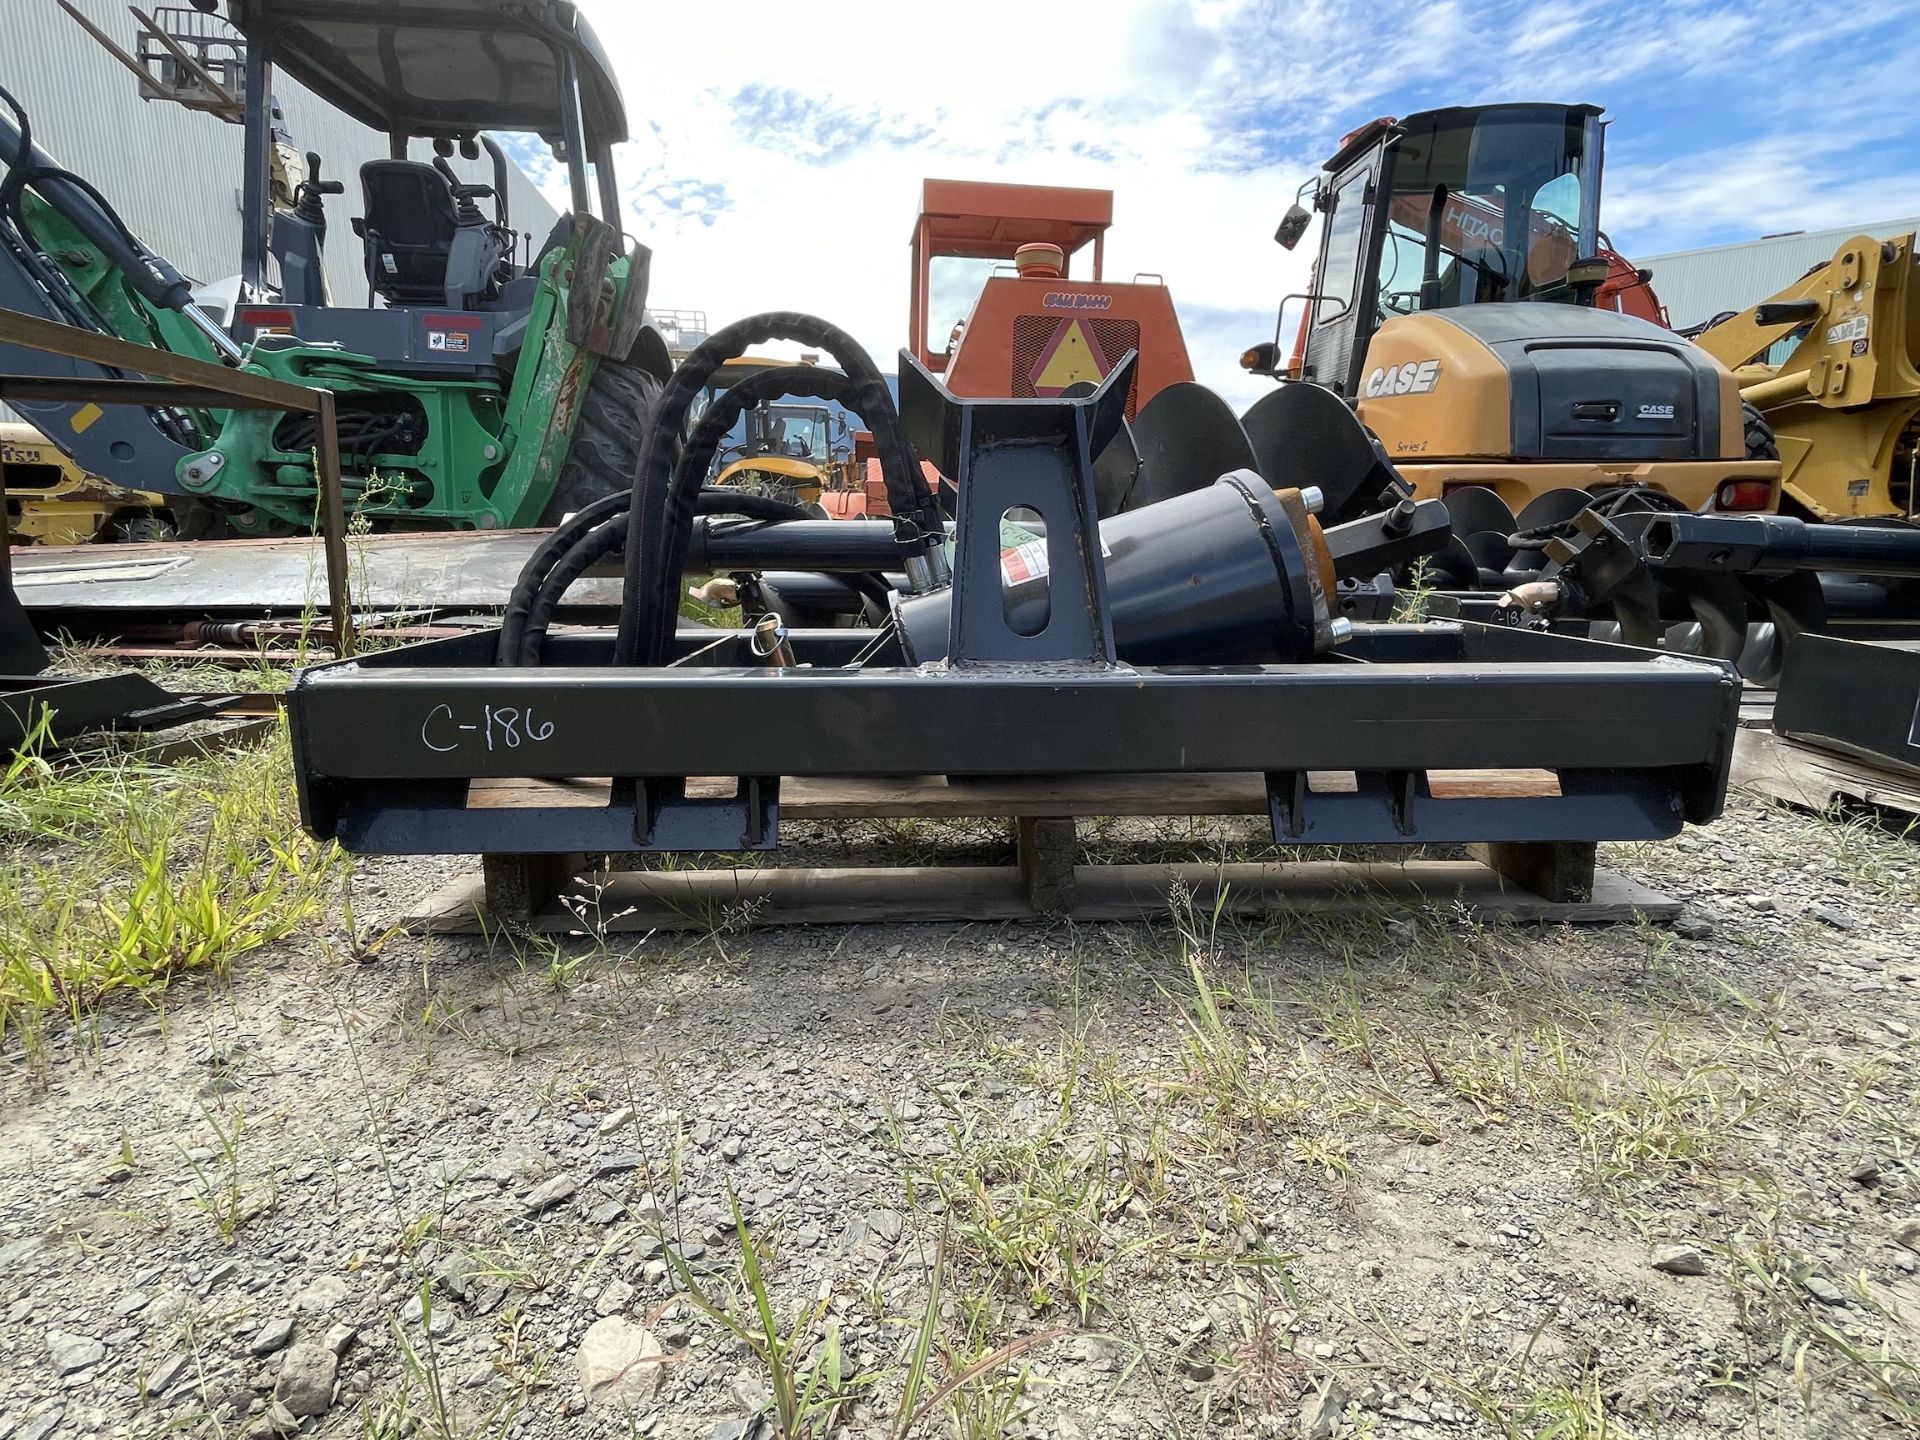 New Wolverine Skid Steer Auger Attachment (C186) - Image 2 of 7